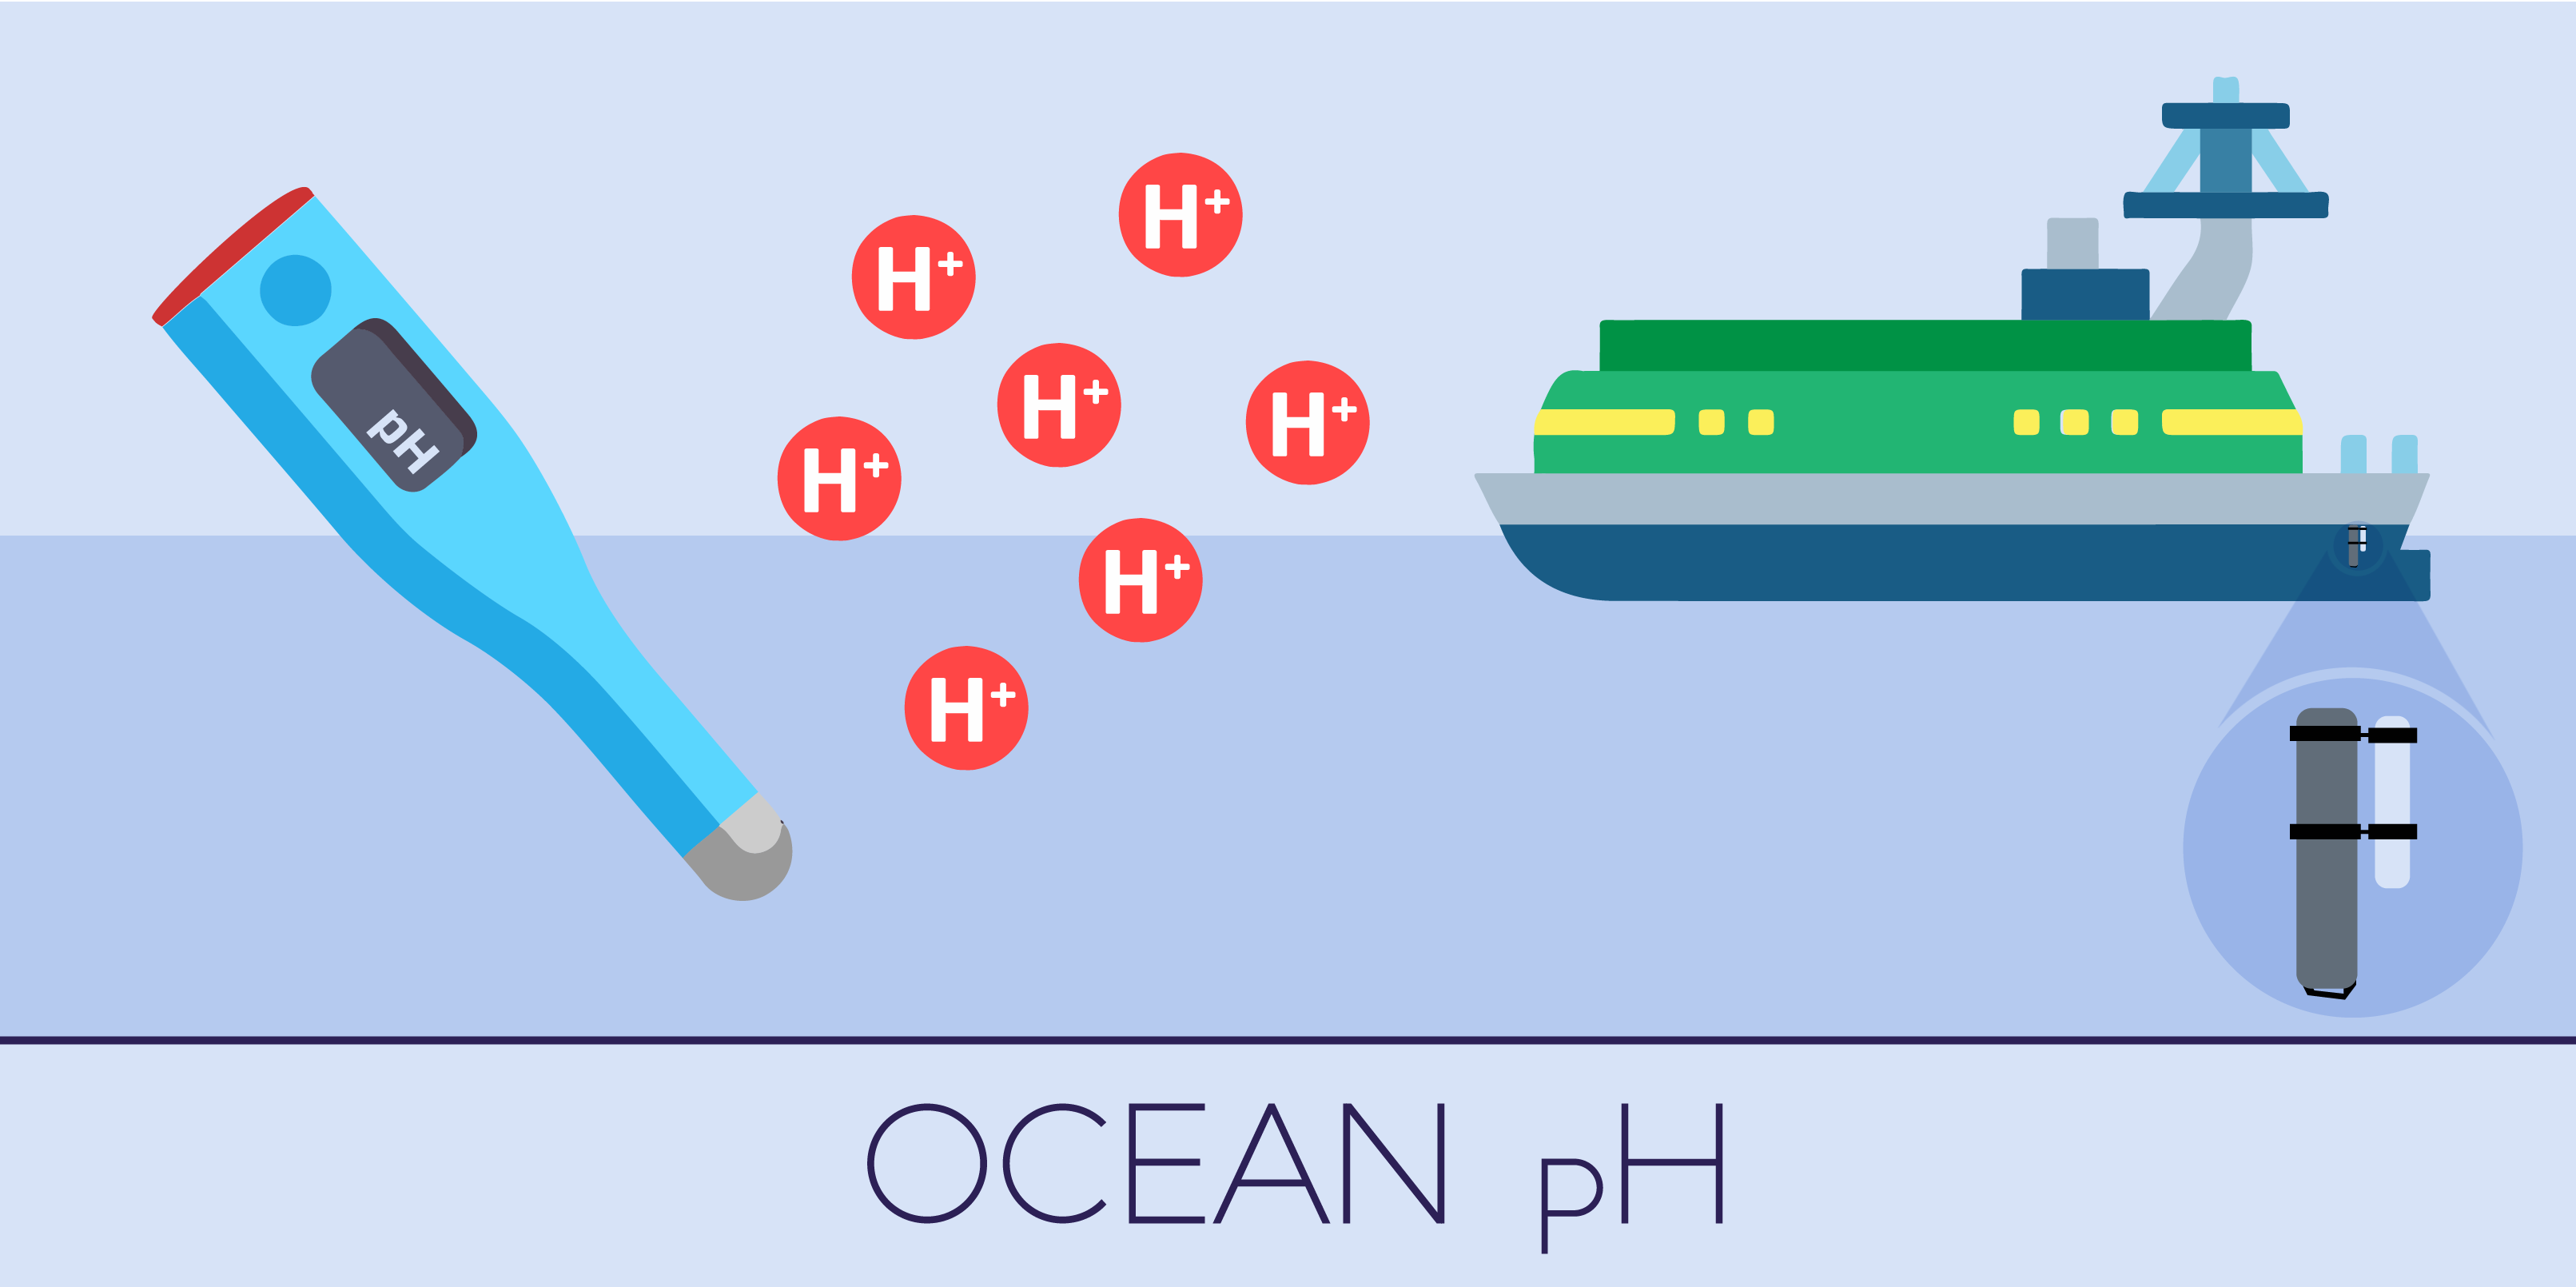 Illustration for ocean pH shows a ship with a testing device and red circles with H+ inside.